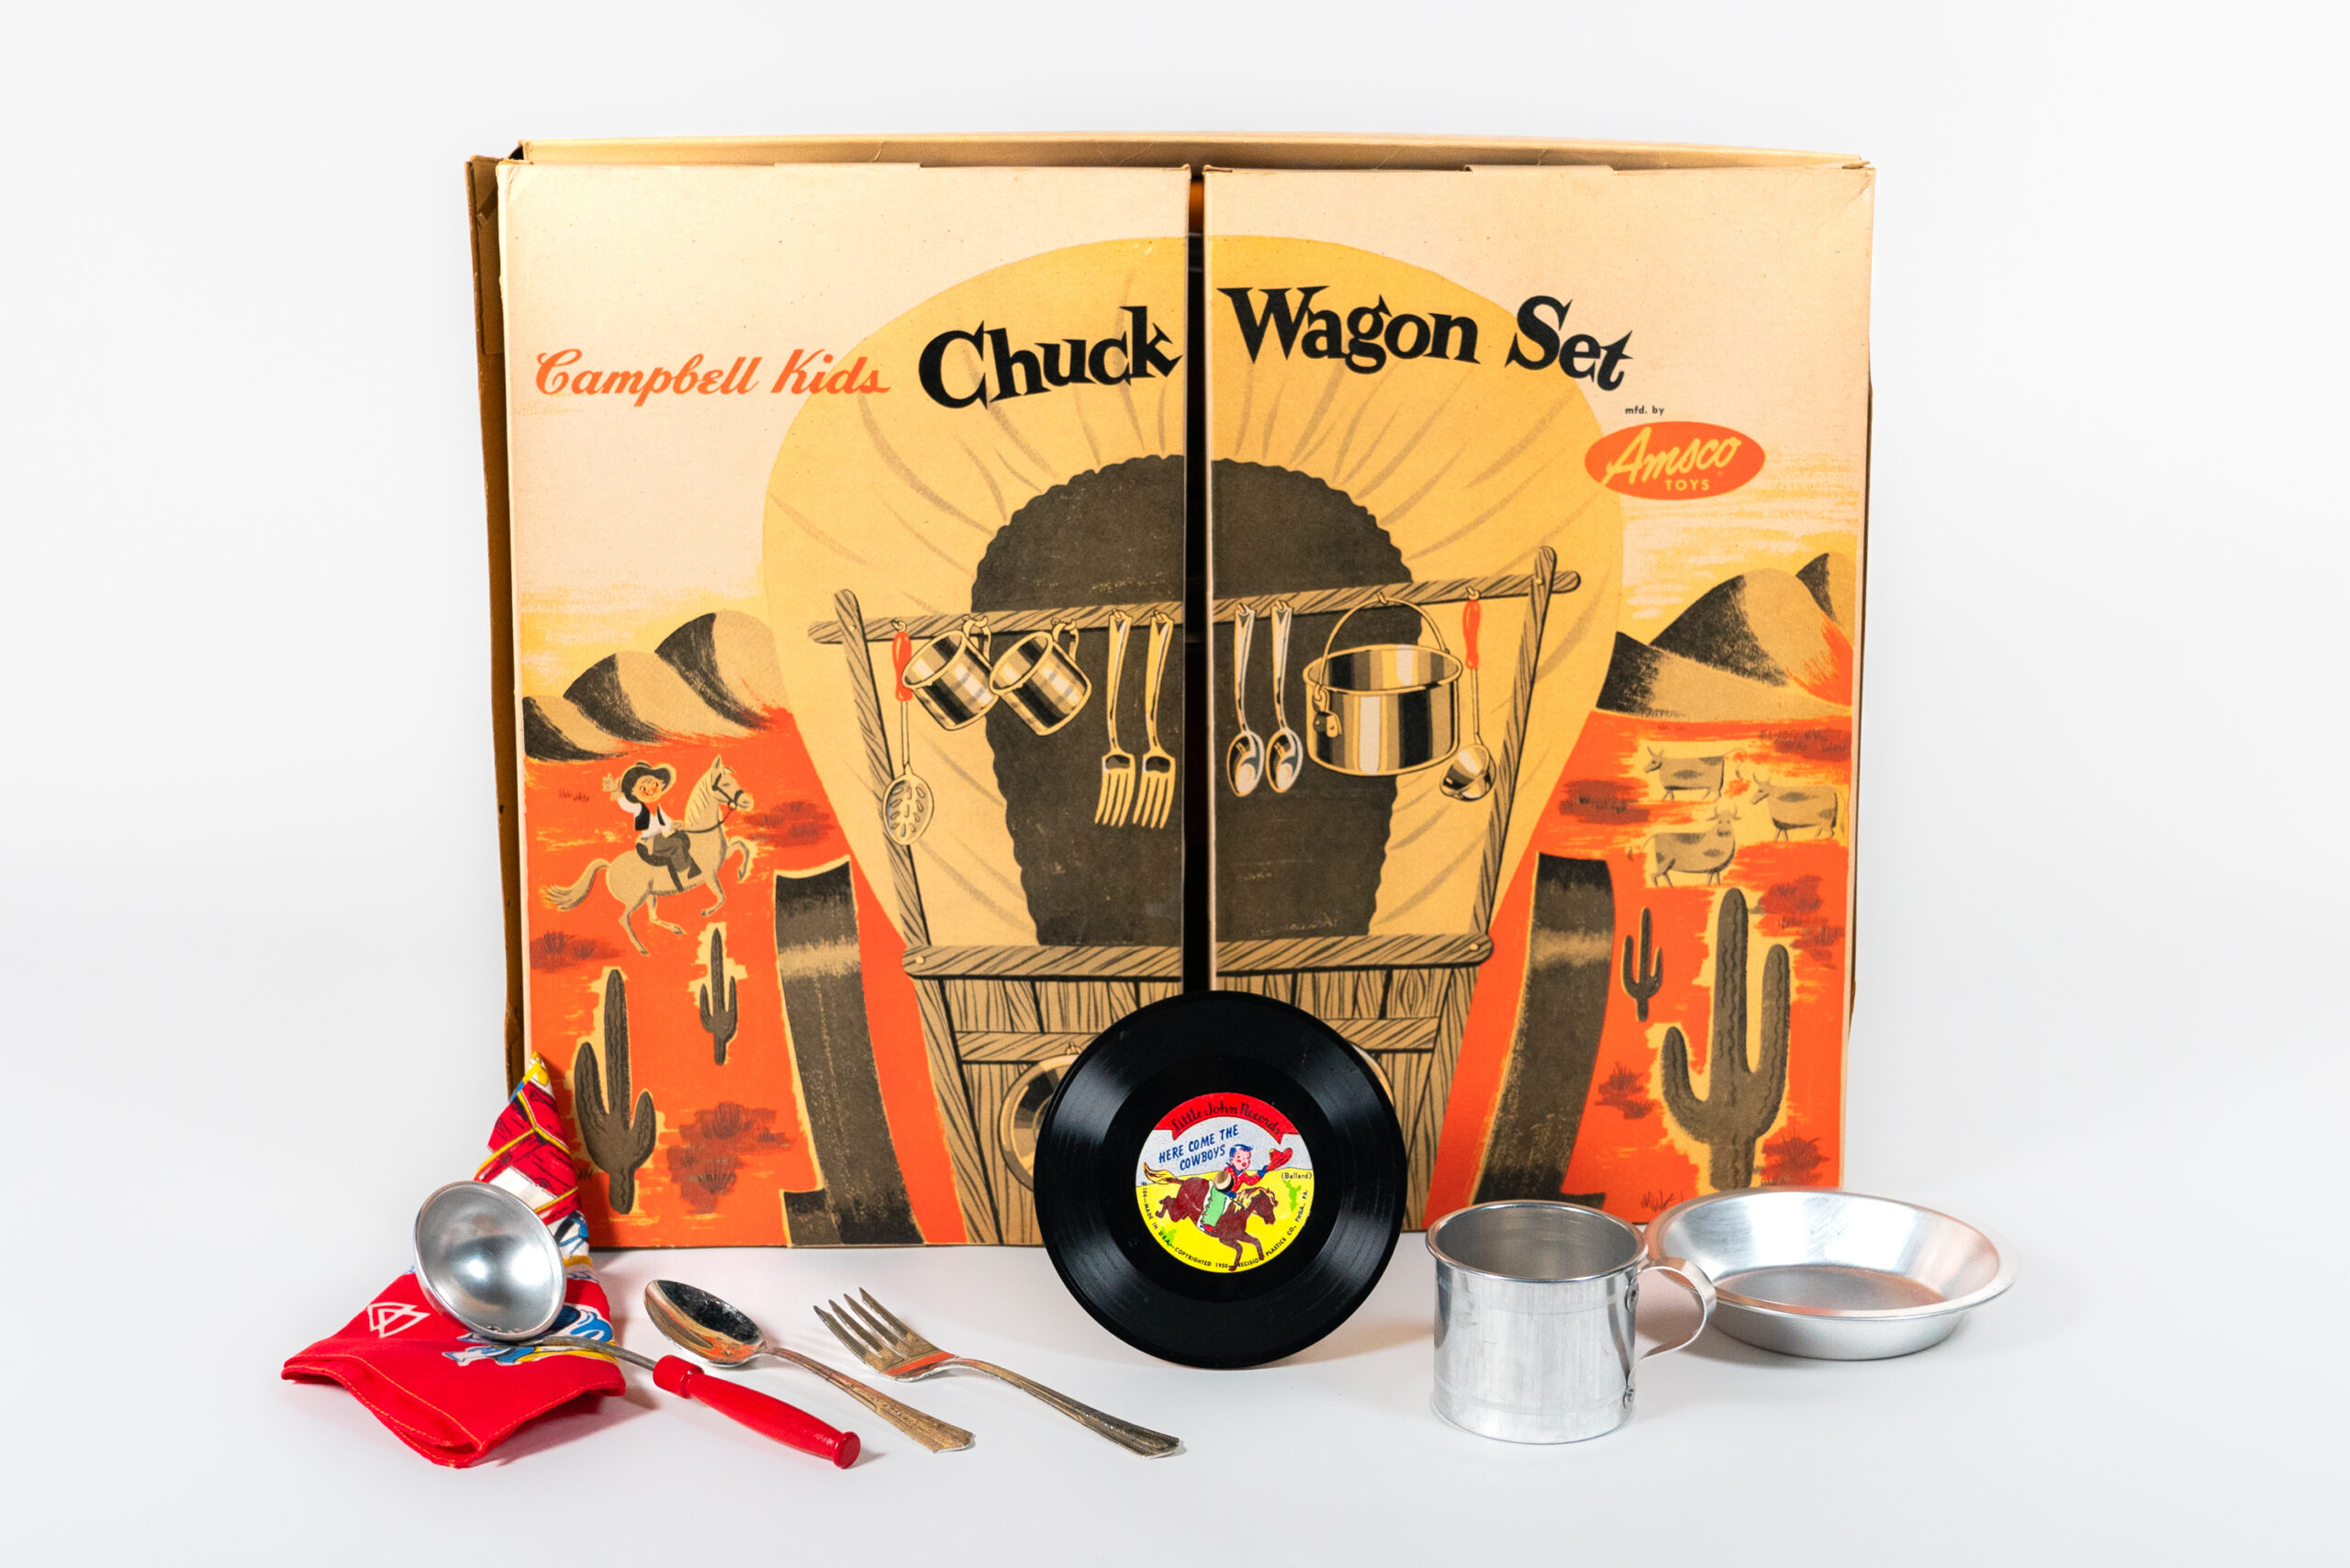 Campbell’s Chuck Wagon Set with cooking utensils, dishes and record.